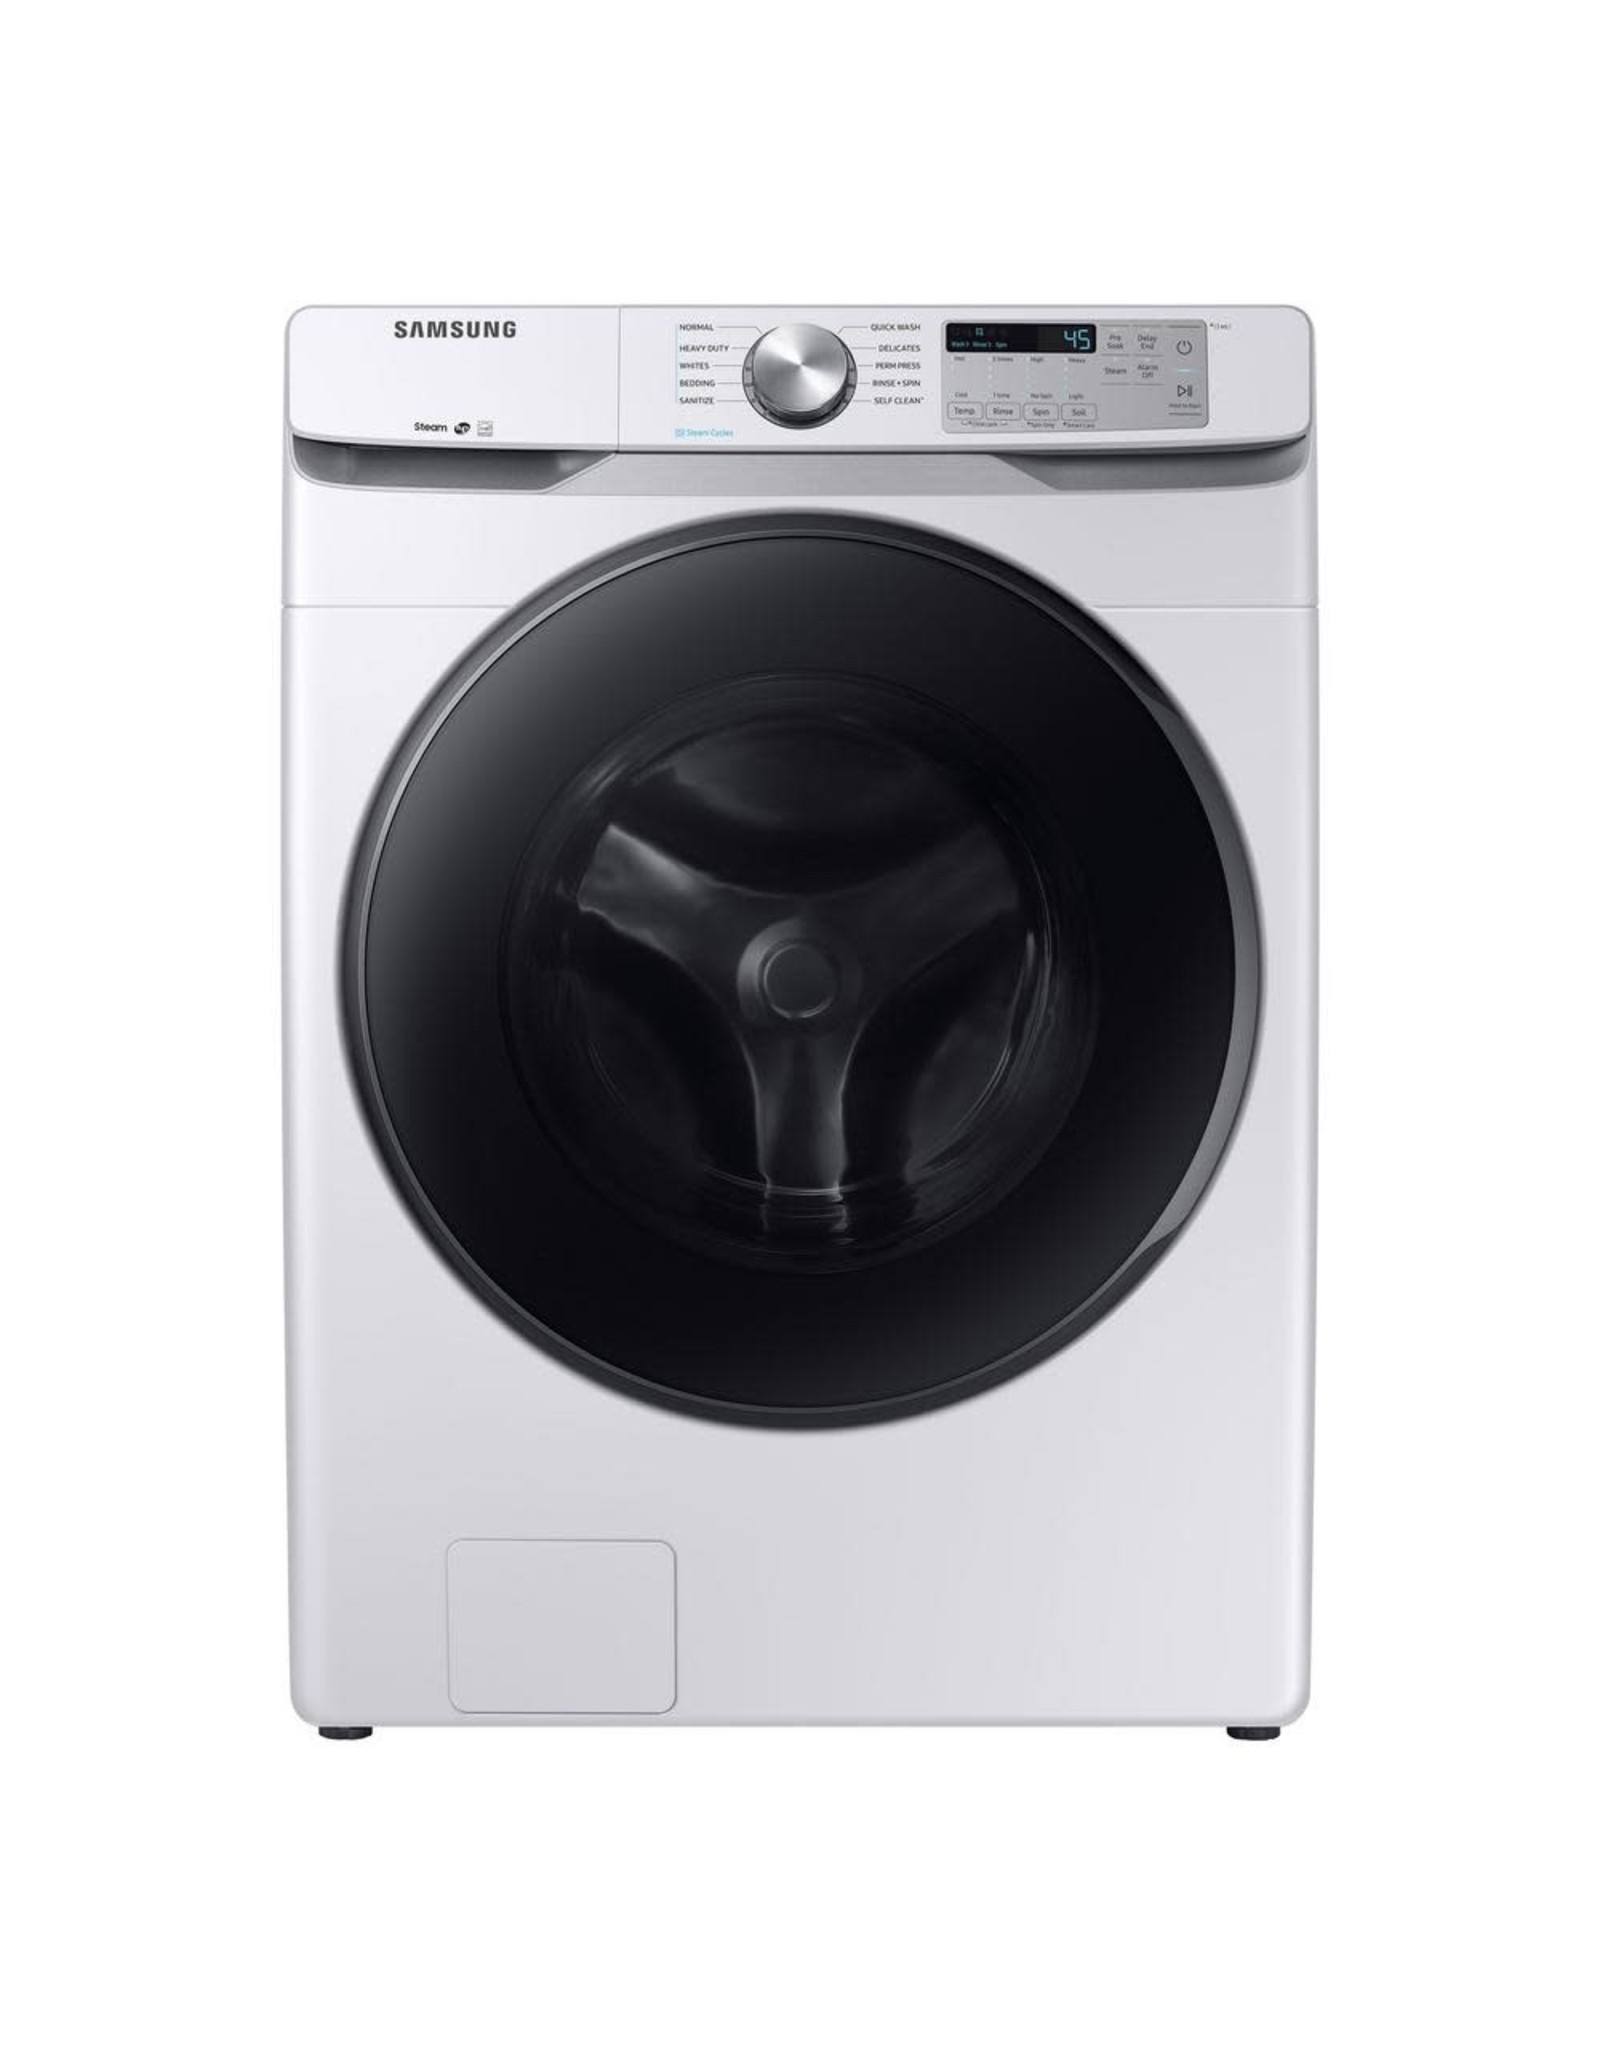 SAMSUNG WF45R6100AW 4.5 cu. ft. High-Efficiency White Front Load Washing Machine with Steam, ENERGY STAR